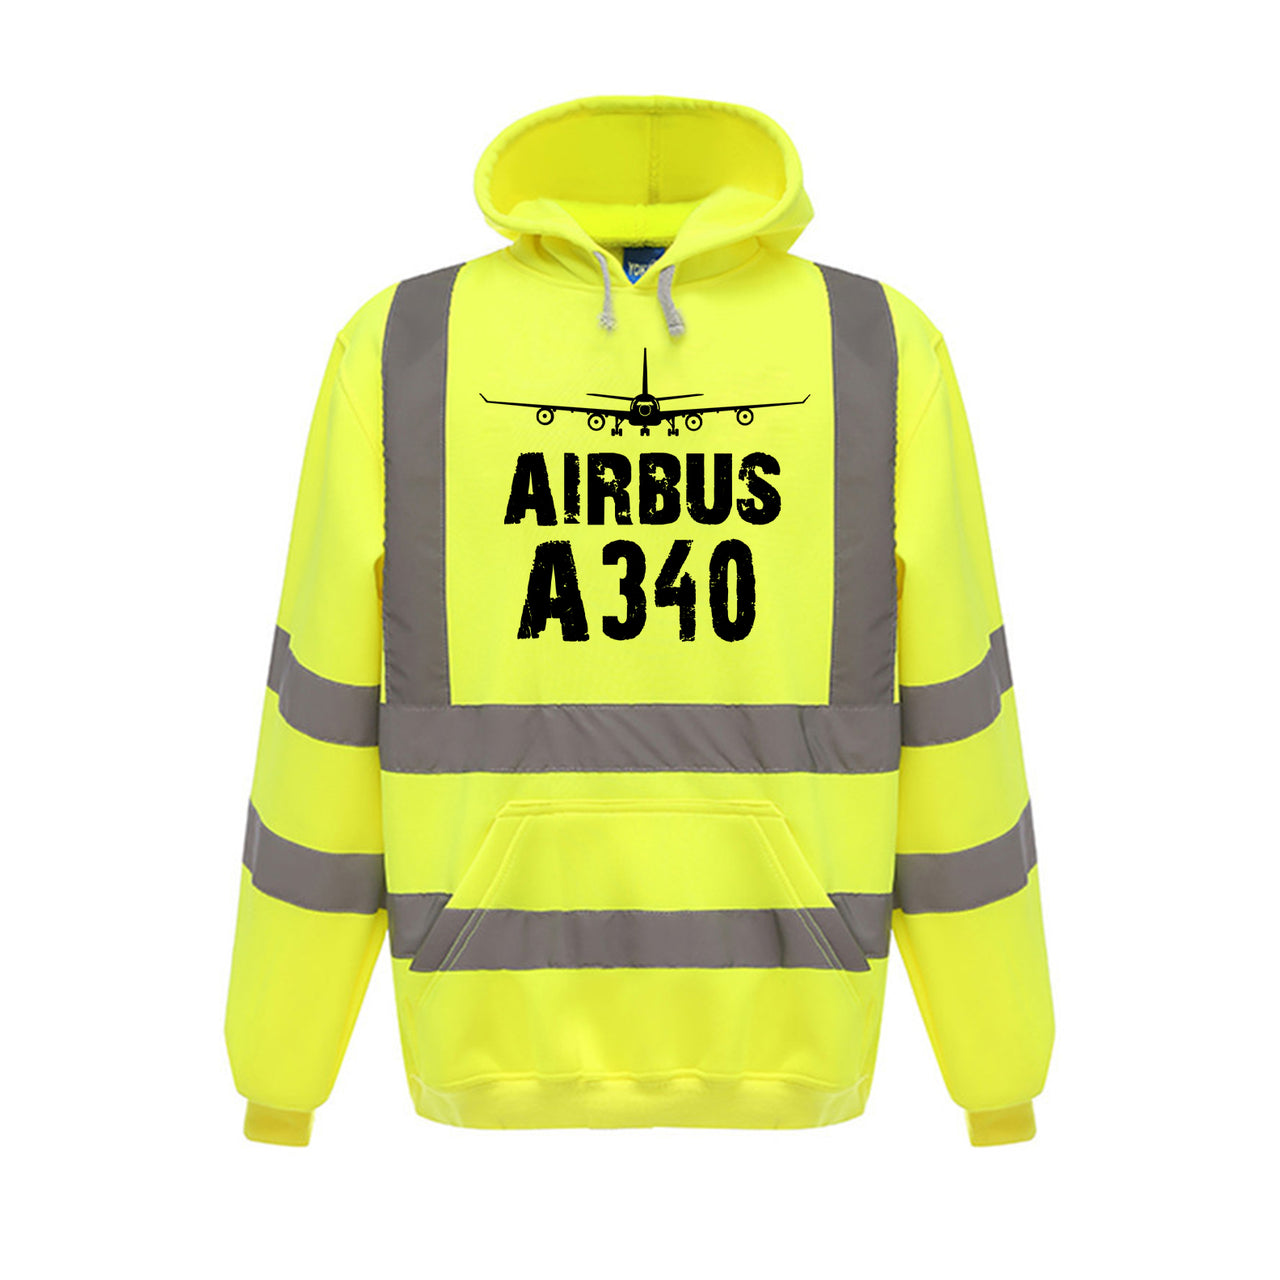 Airbus A340 & Plane Designed Reflective Hoodies